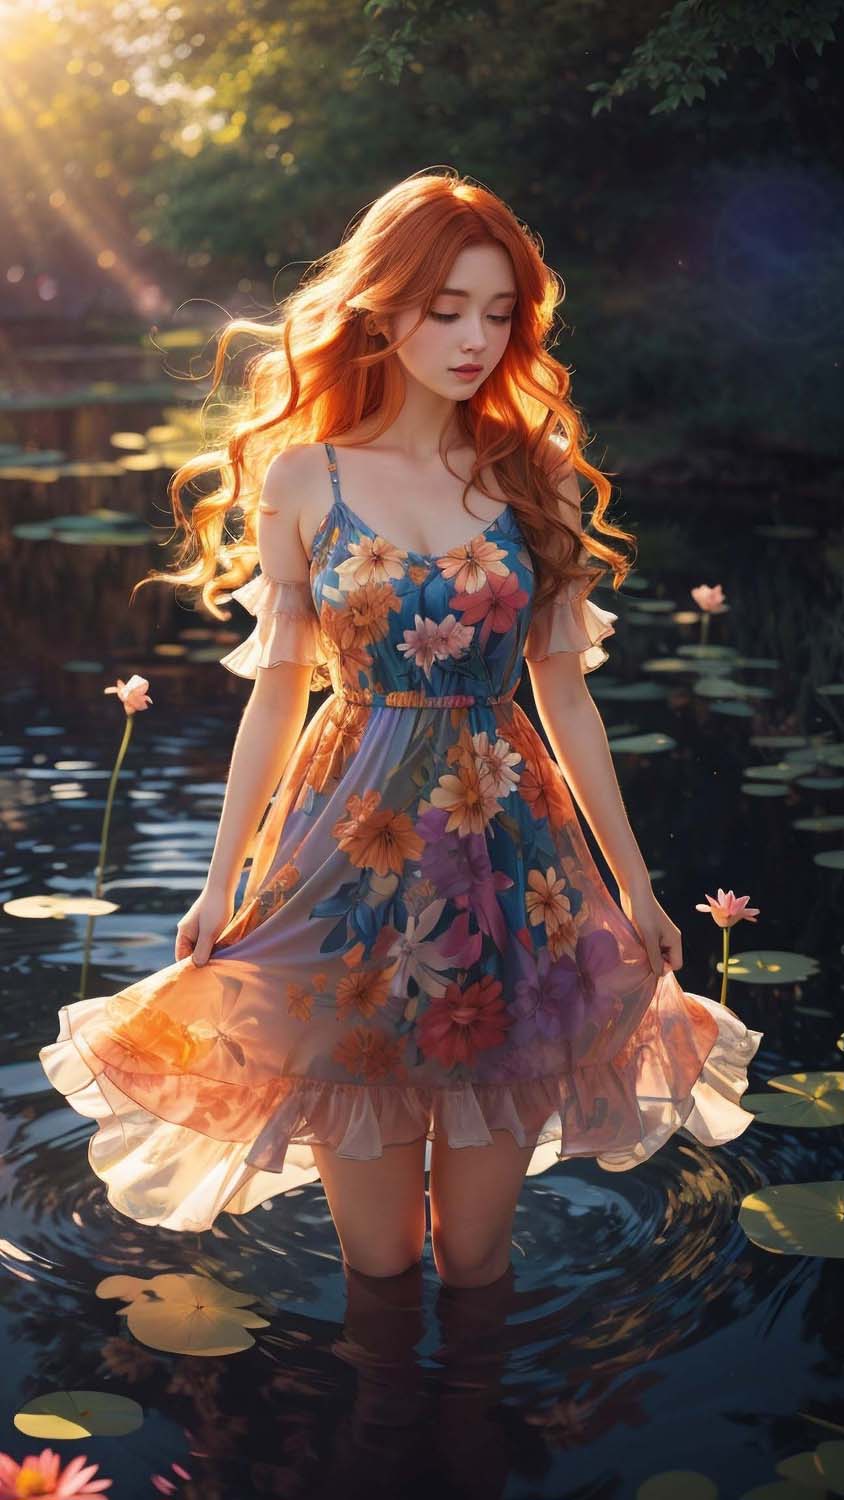 Redhead Girl in Nature iPhone Wallpaper